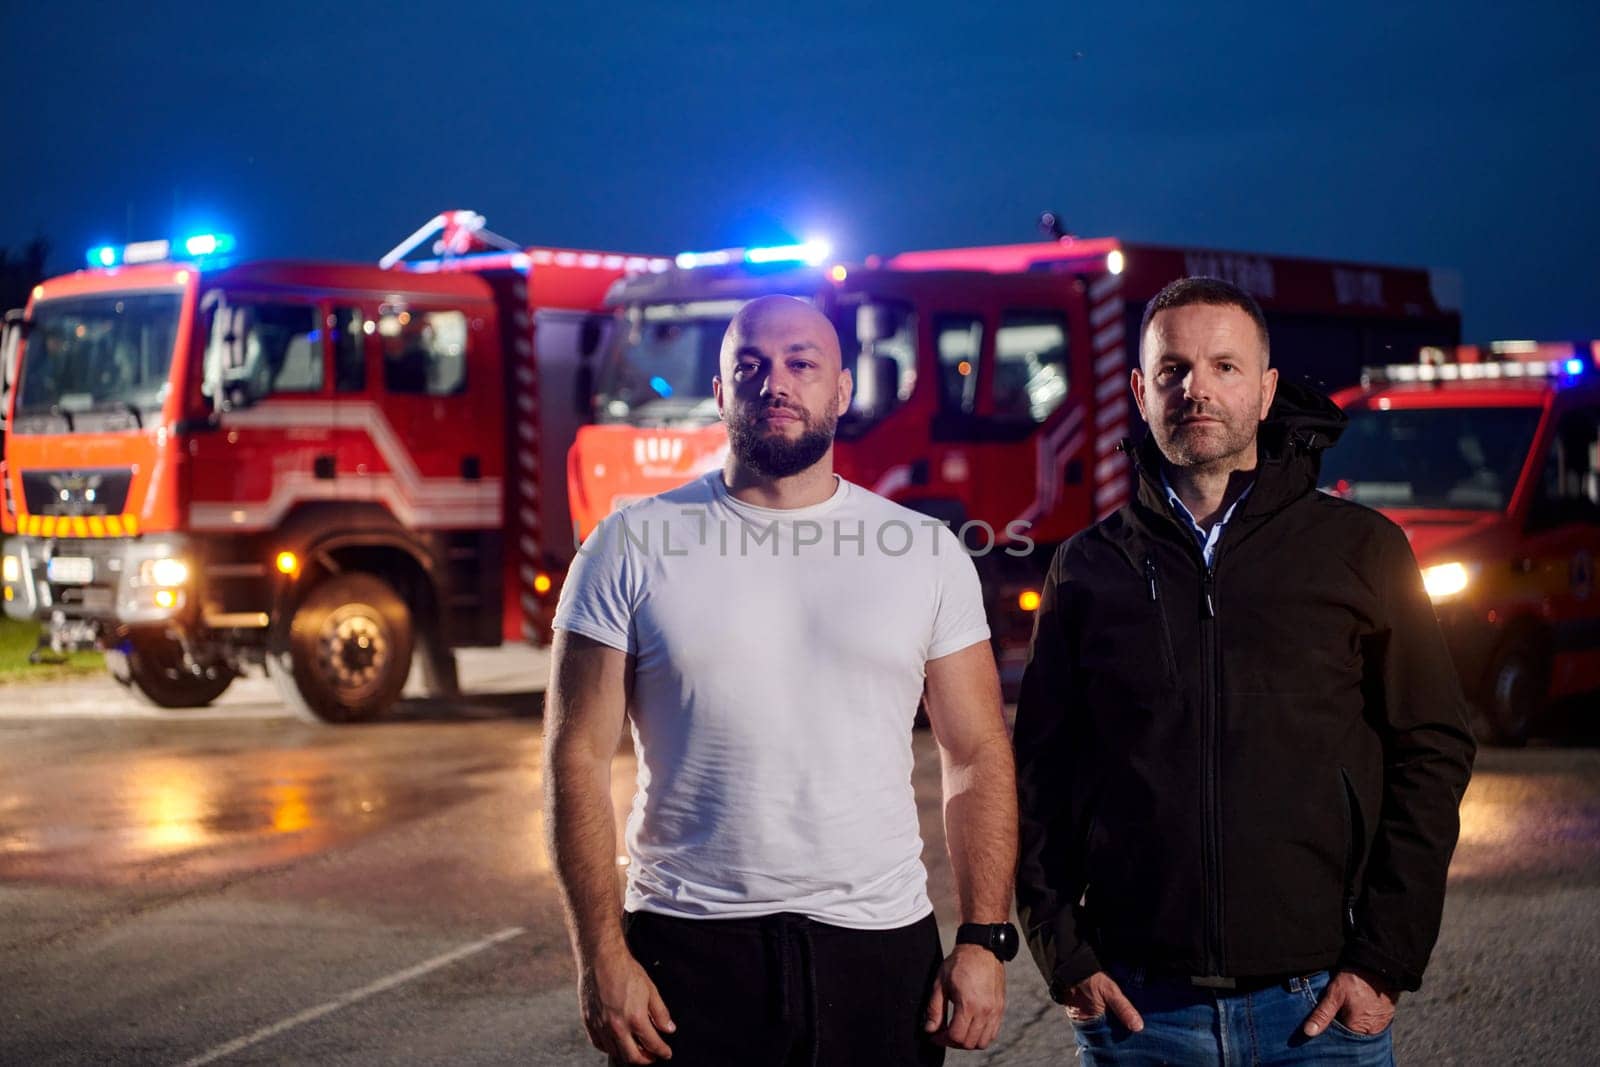 Group of firefighters, dressed in civilian clothing, stand in front of fire trucks during the night, showcasing a moment of camaraderie and unity among the team as they reflect on their duties and the challenges faced during their firefighting service by dotshock